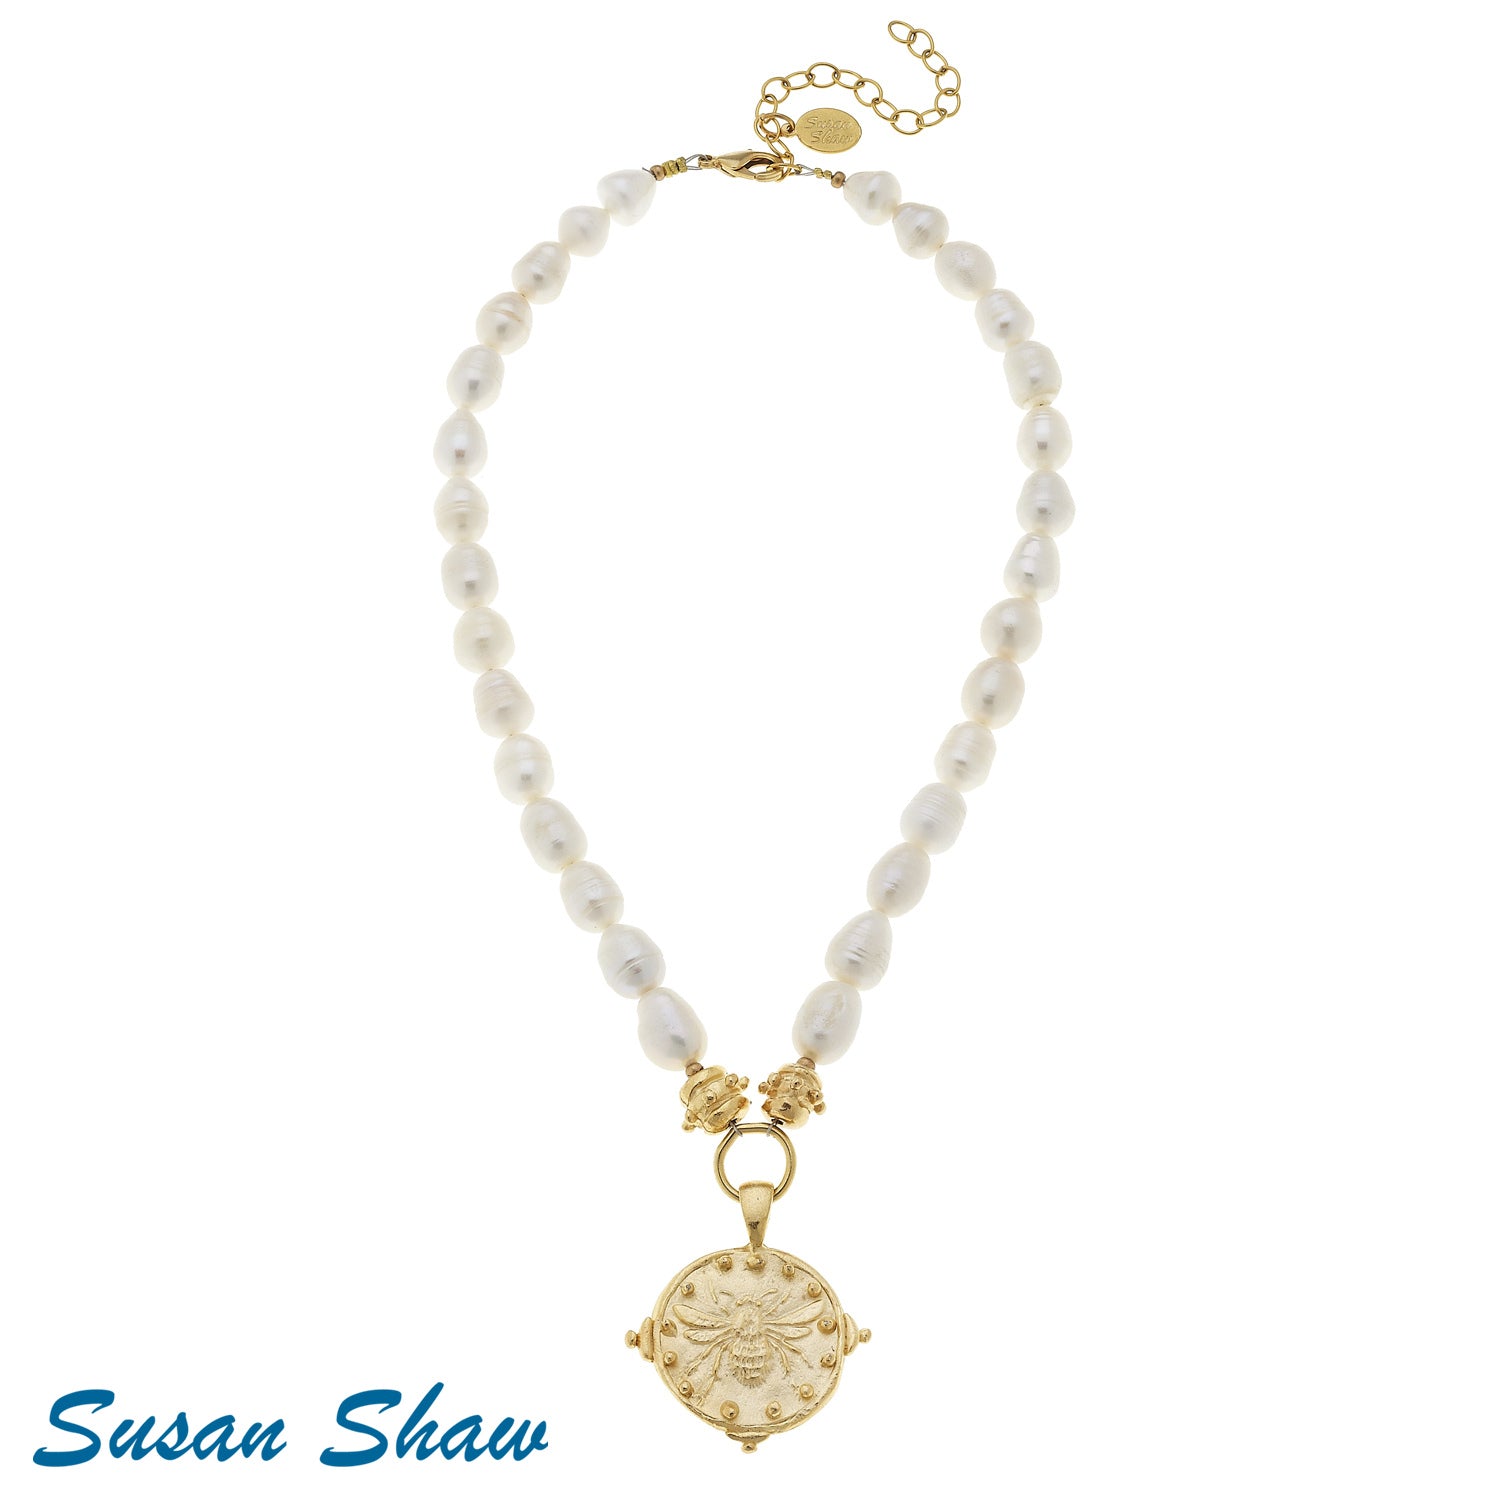 Susan Shaw Handcast Gold Bee on Genuine Freshwater Pearl Necklace